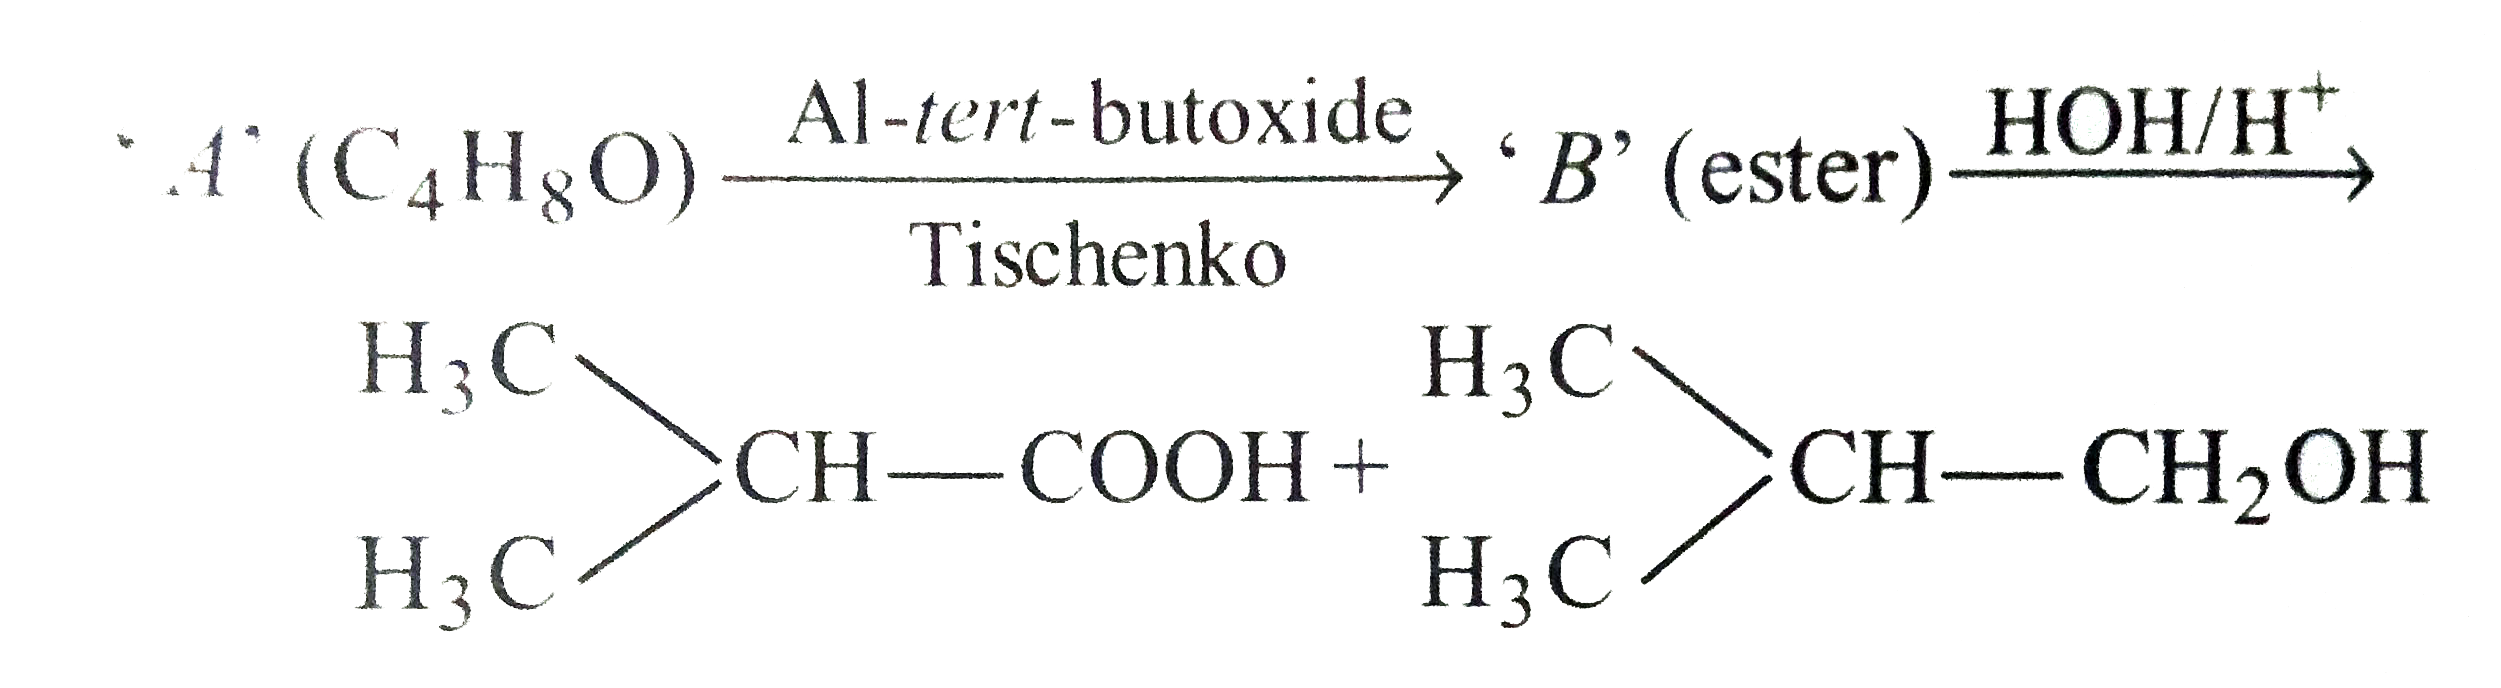 Aldehyde      'A' and 'B' are :